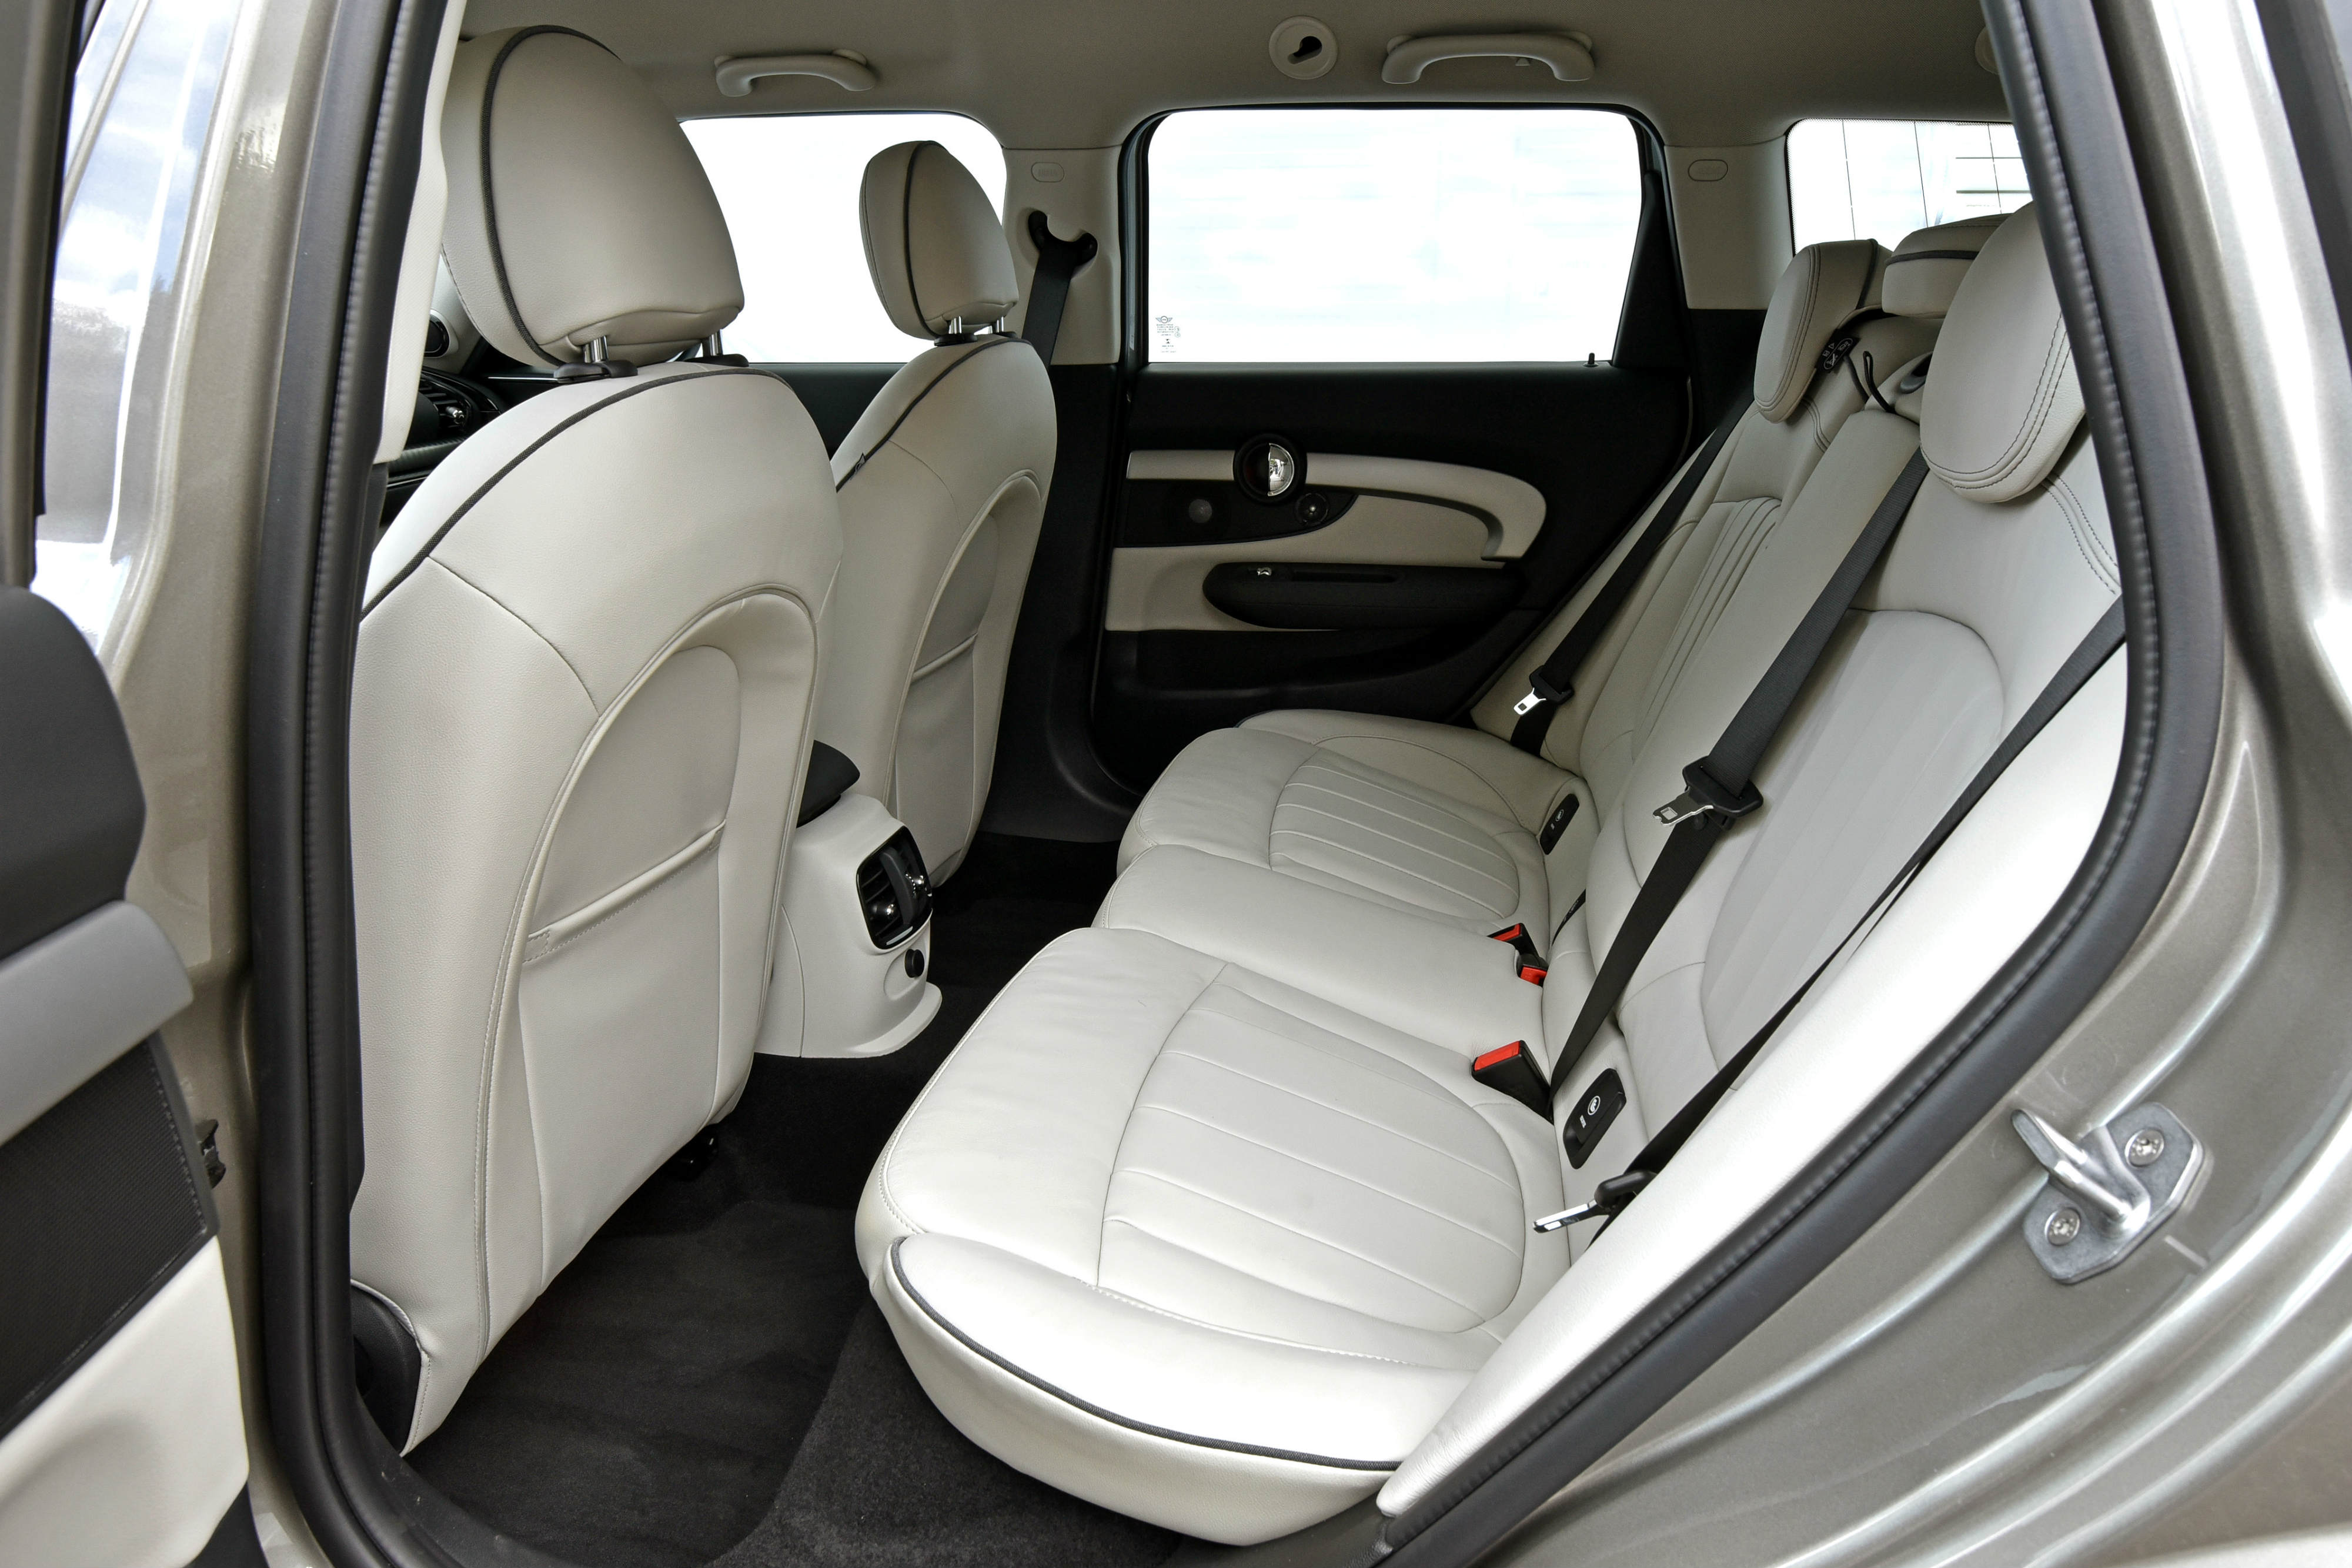 2015 Min iClubman is most spacious Mini yet